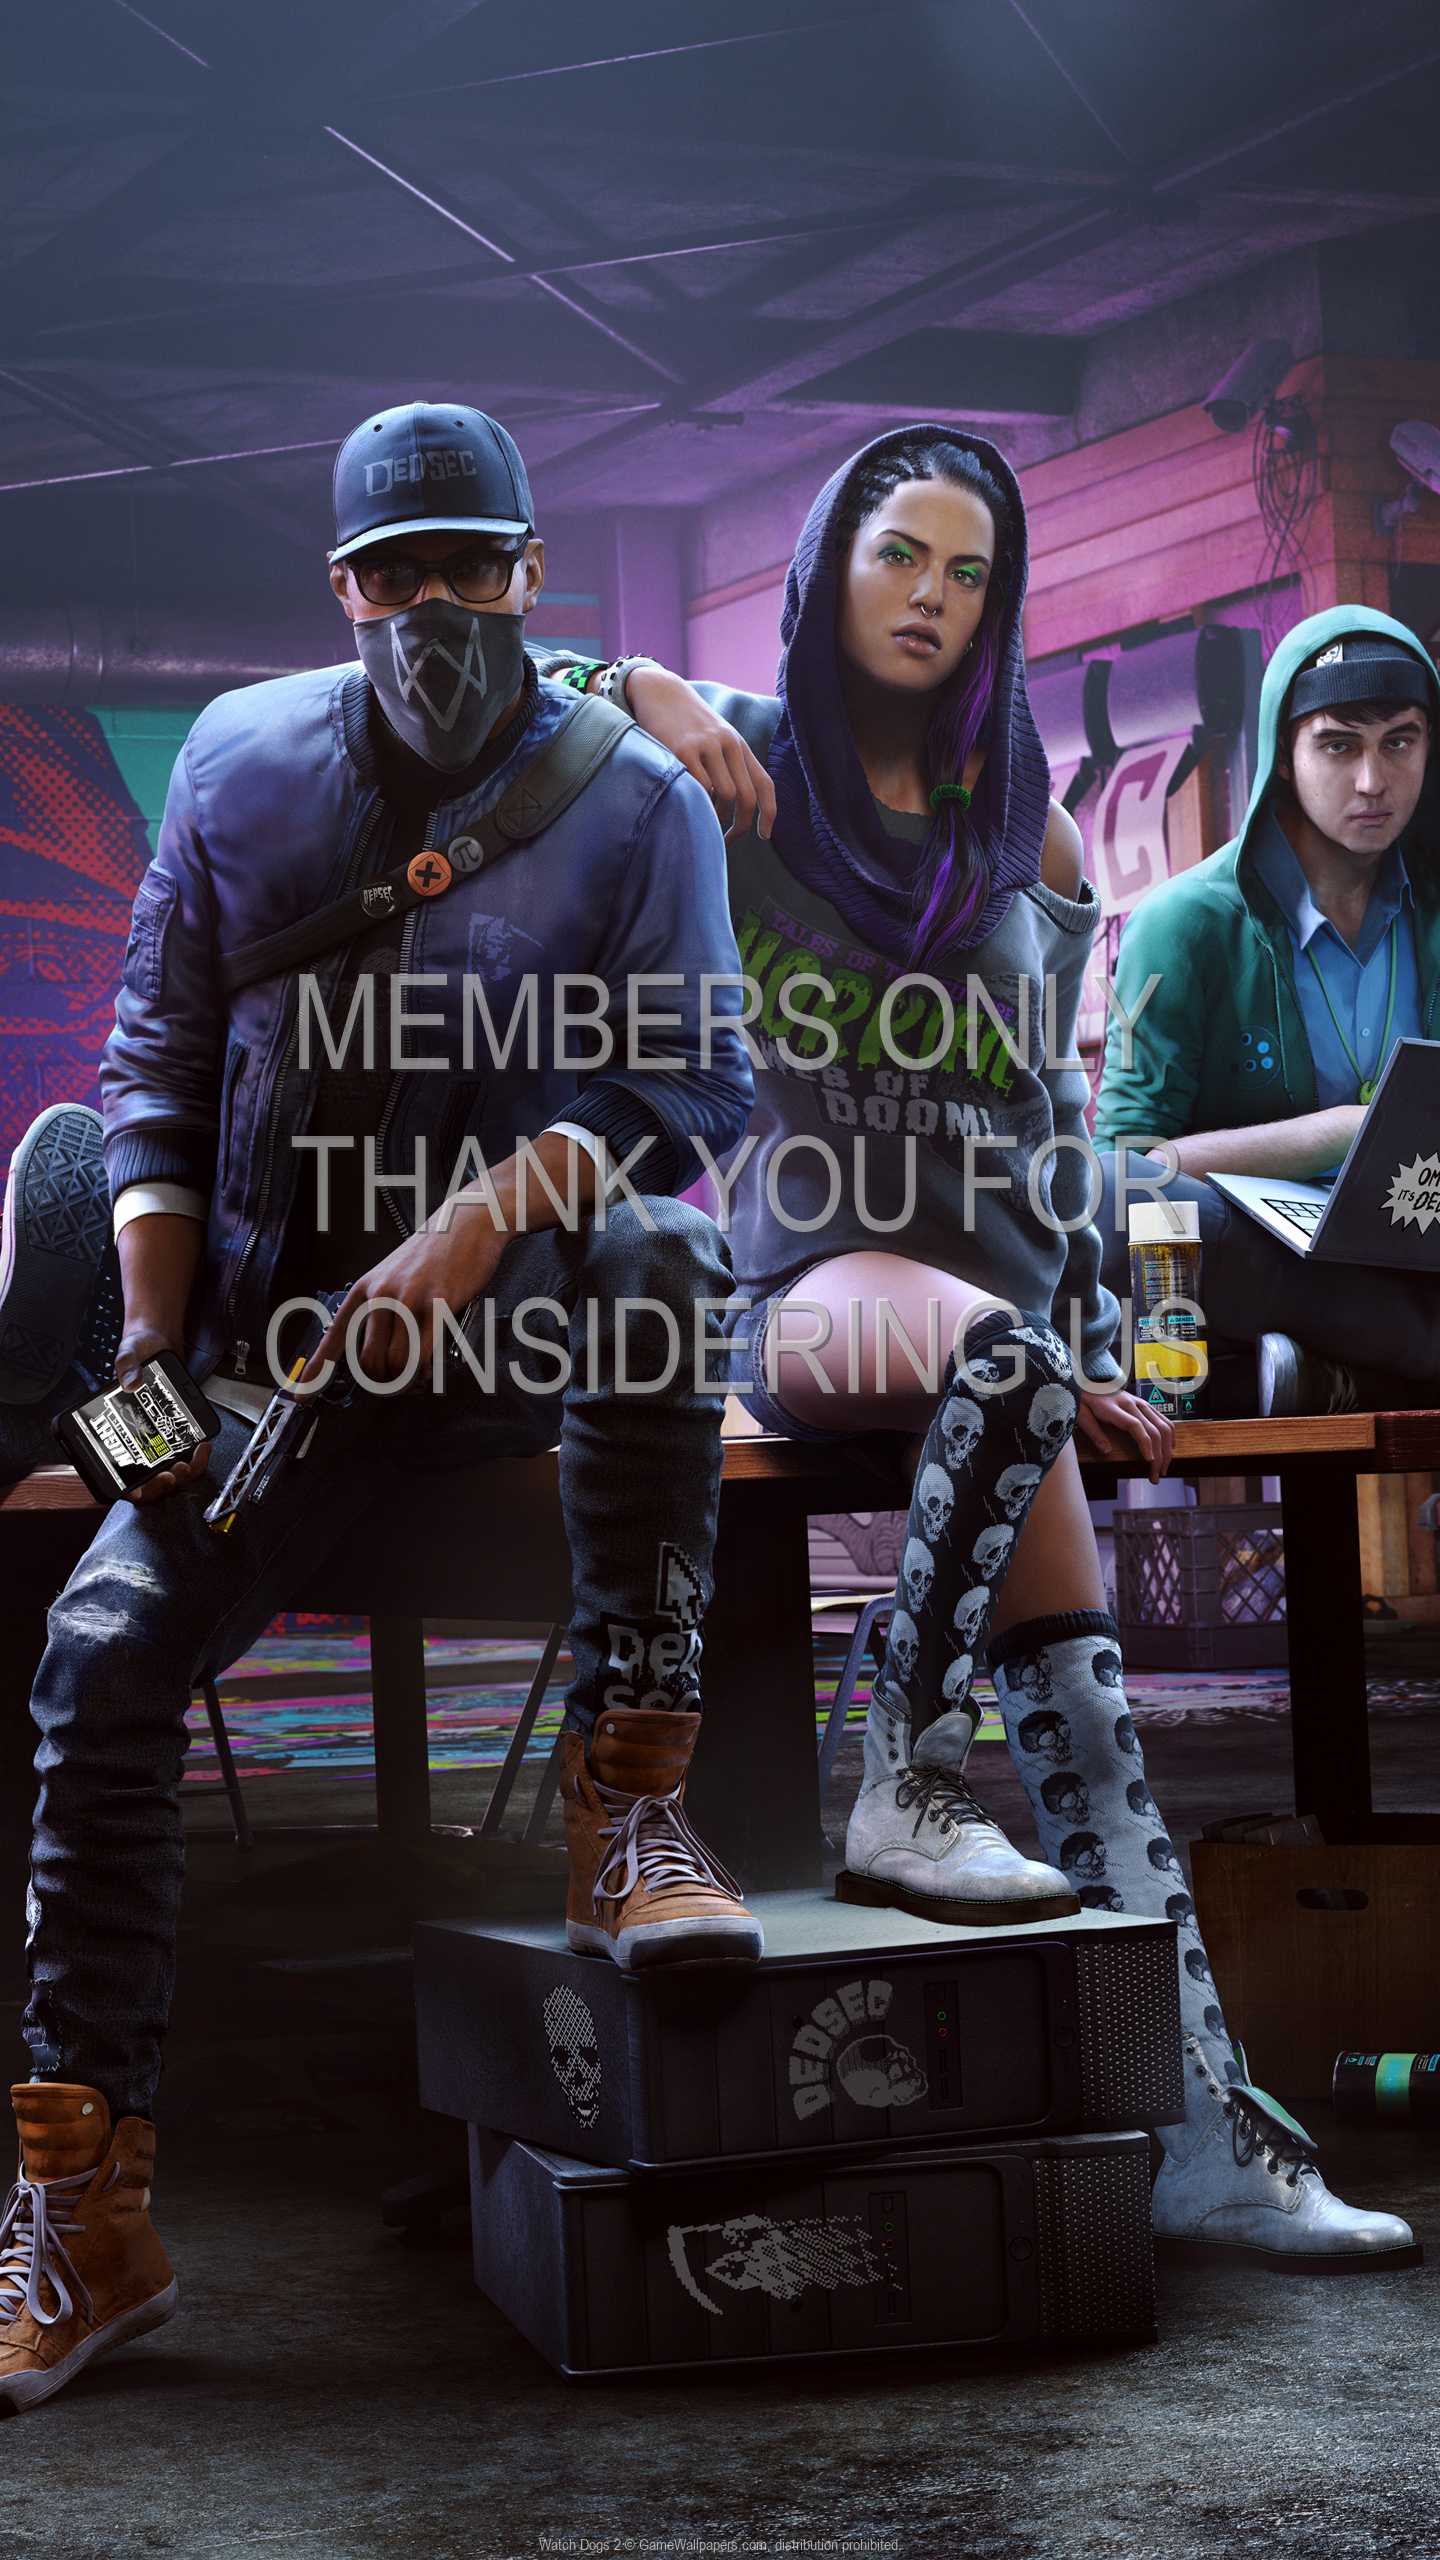 Watch Dogs 2 1440p Vertical Mobile wallpaper or background 03